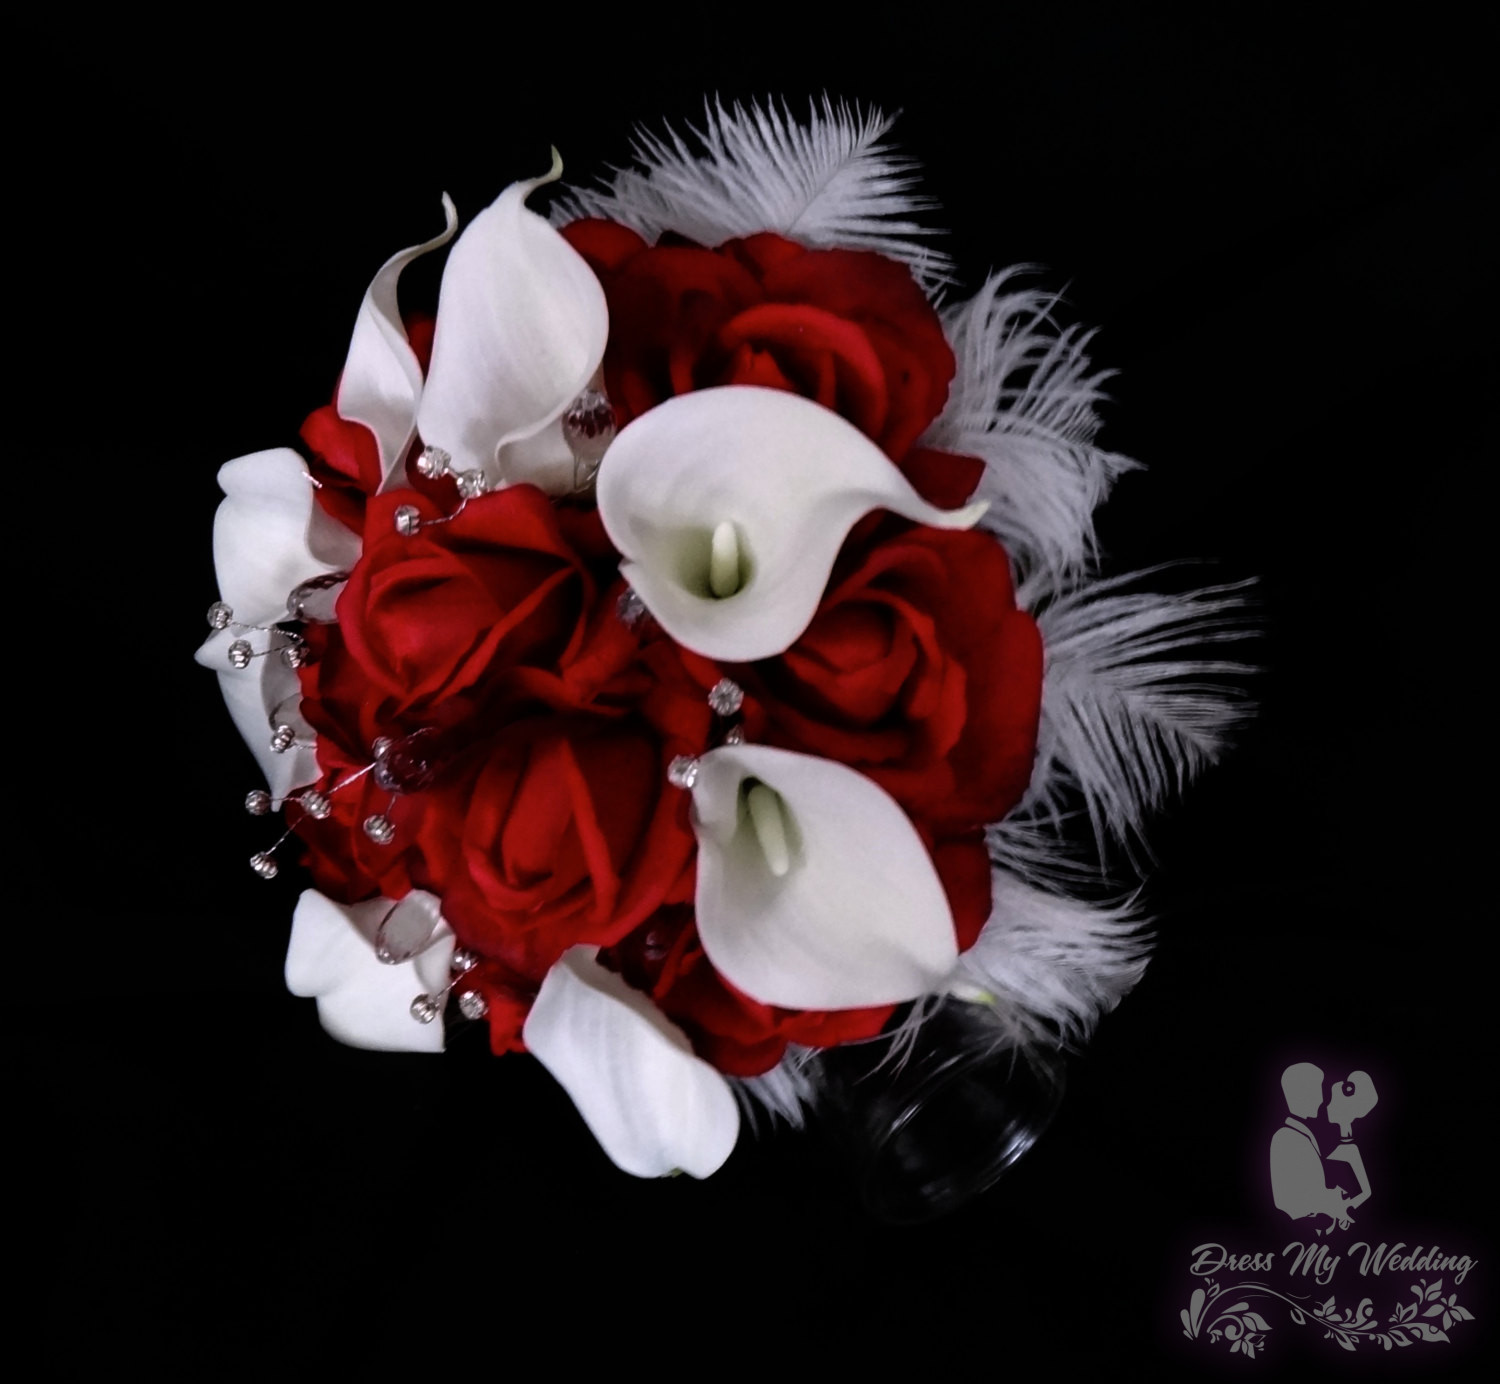 red and white flower bouquet for wedding